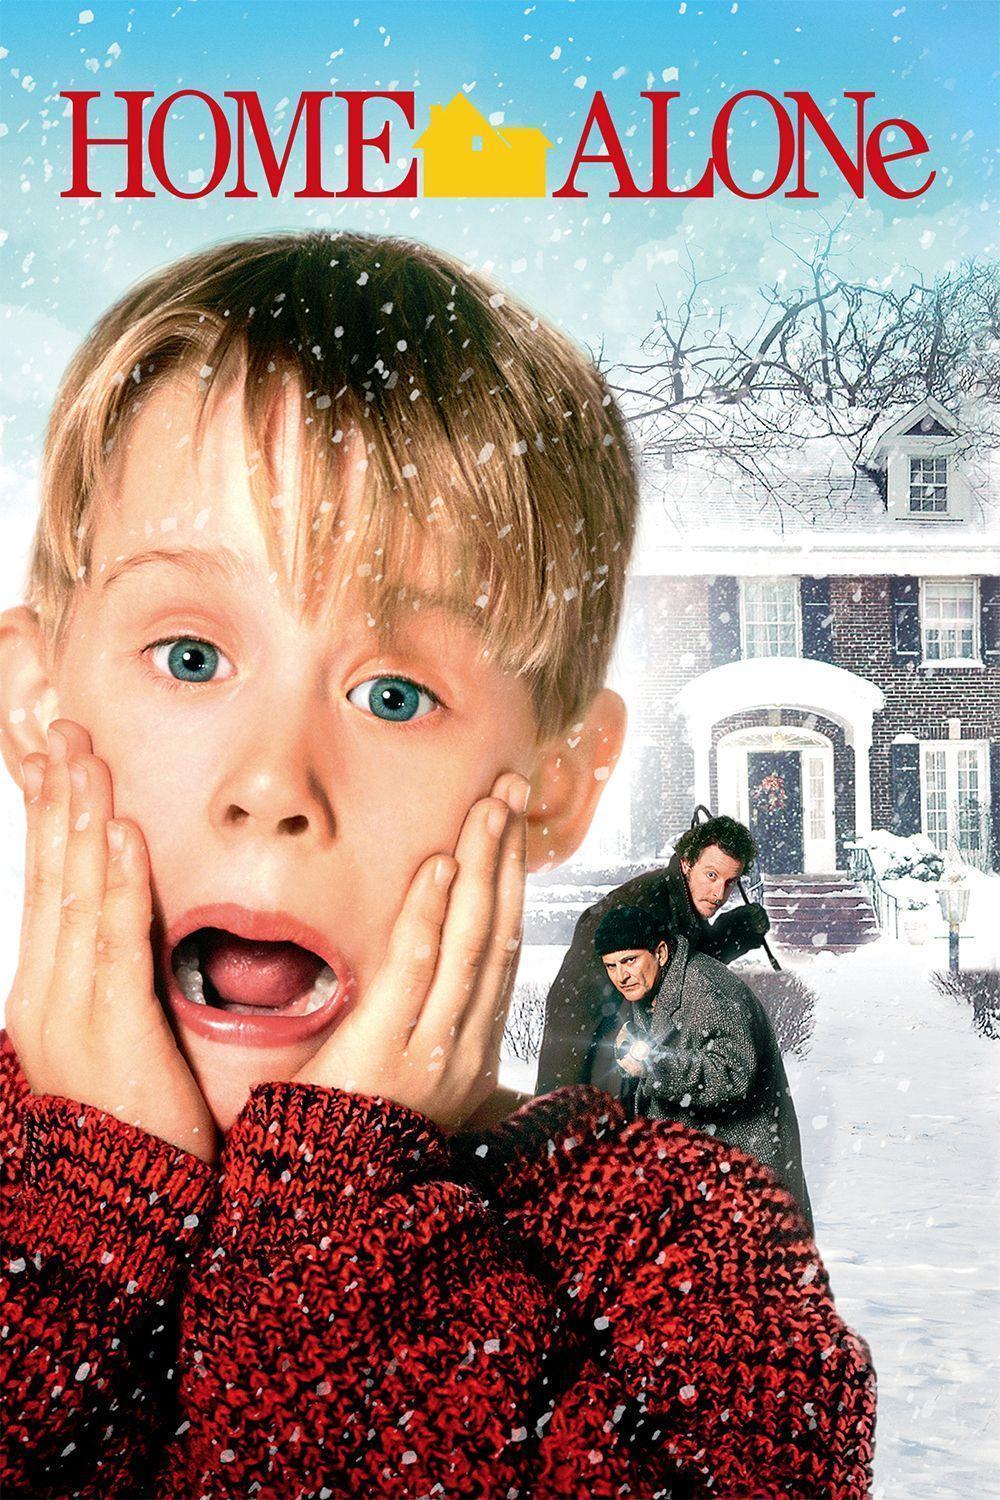 1000x1000px Home Alone 380.88 KB